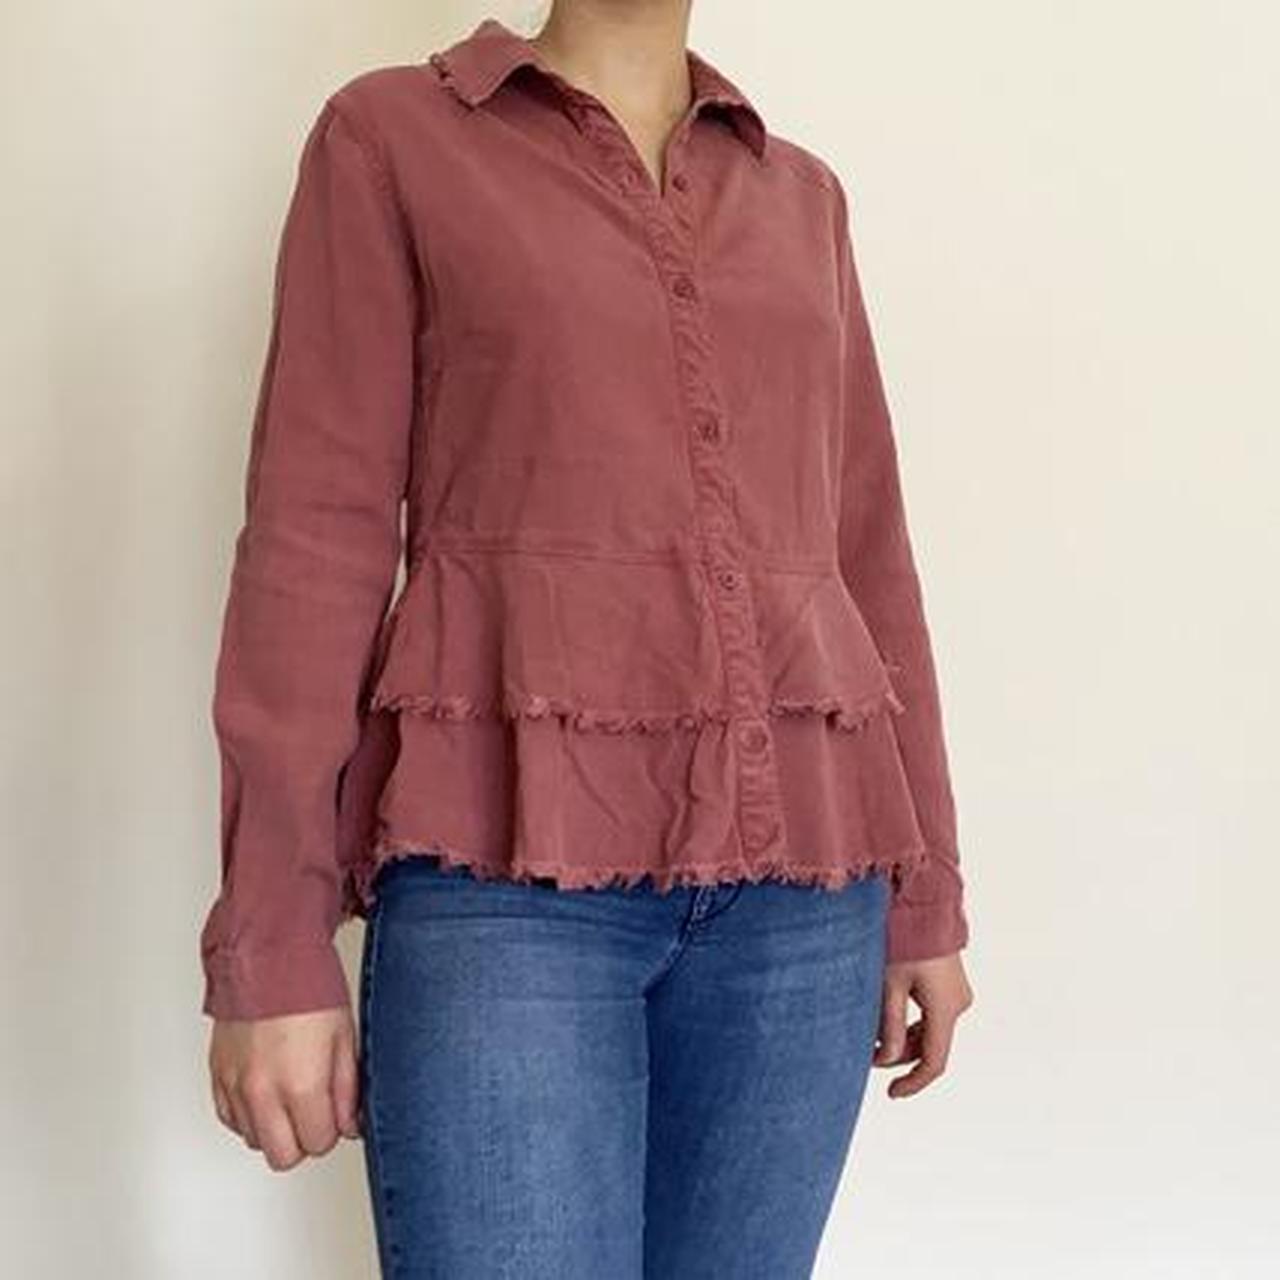 Anthropologie Women's Pink and Red Blouse (3)